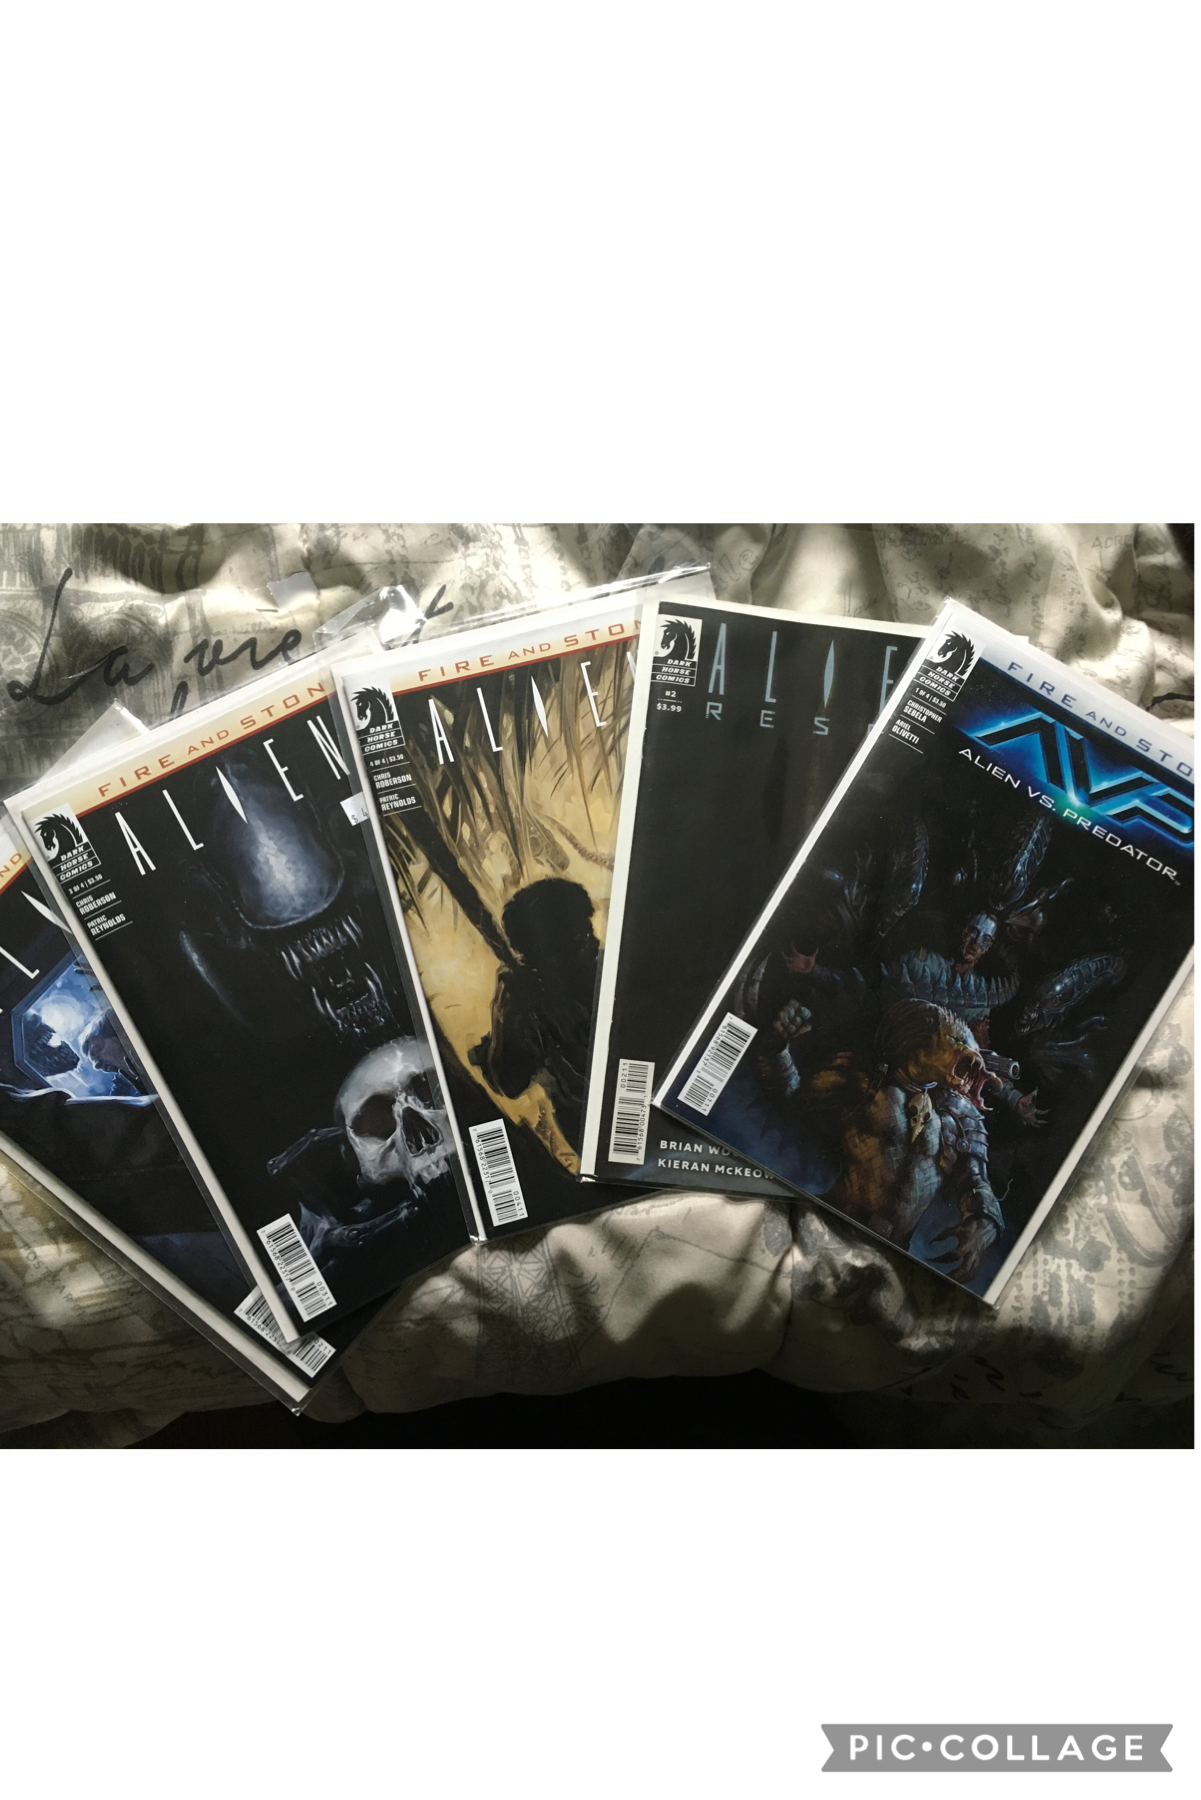 Went to the nerd store last week and got me self some Alien comics- 
Also bought a bunch of junk from Hyena Agenda so I’m super excited for that to come in 
